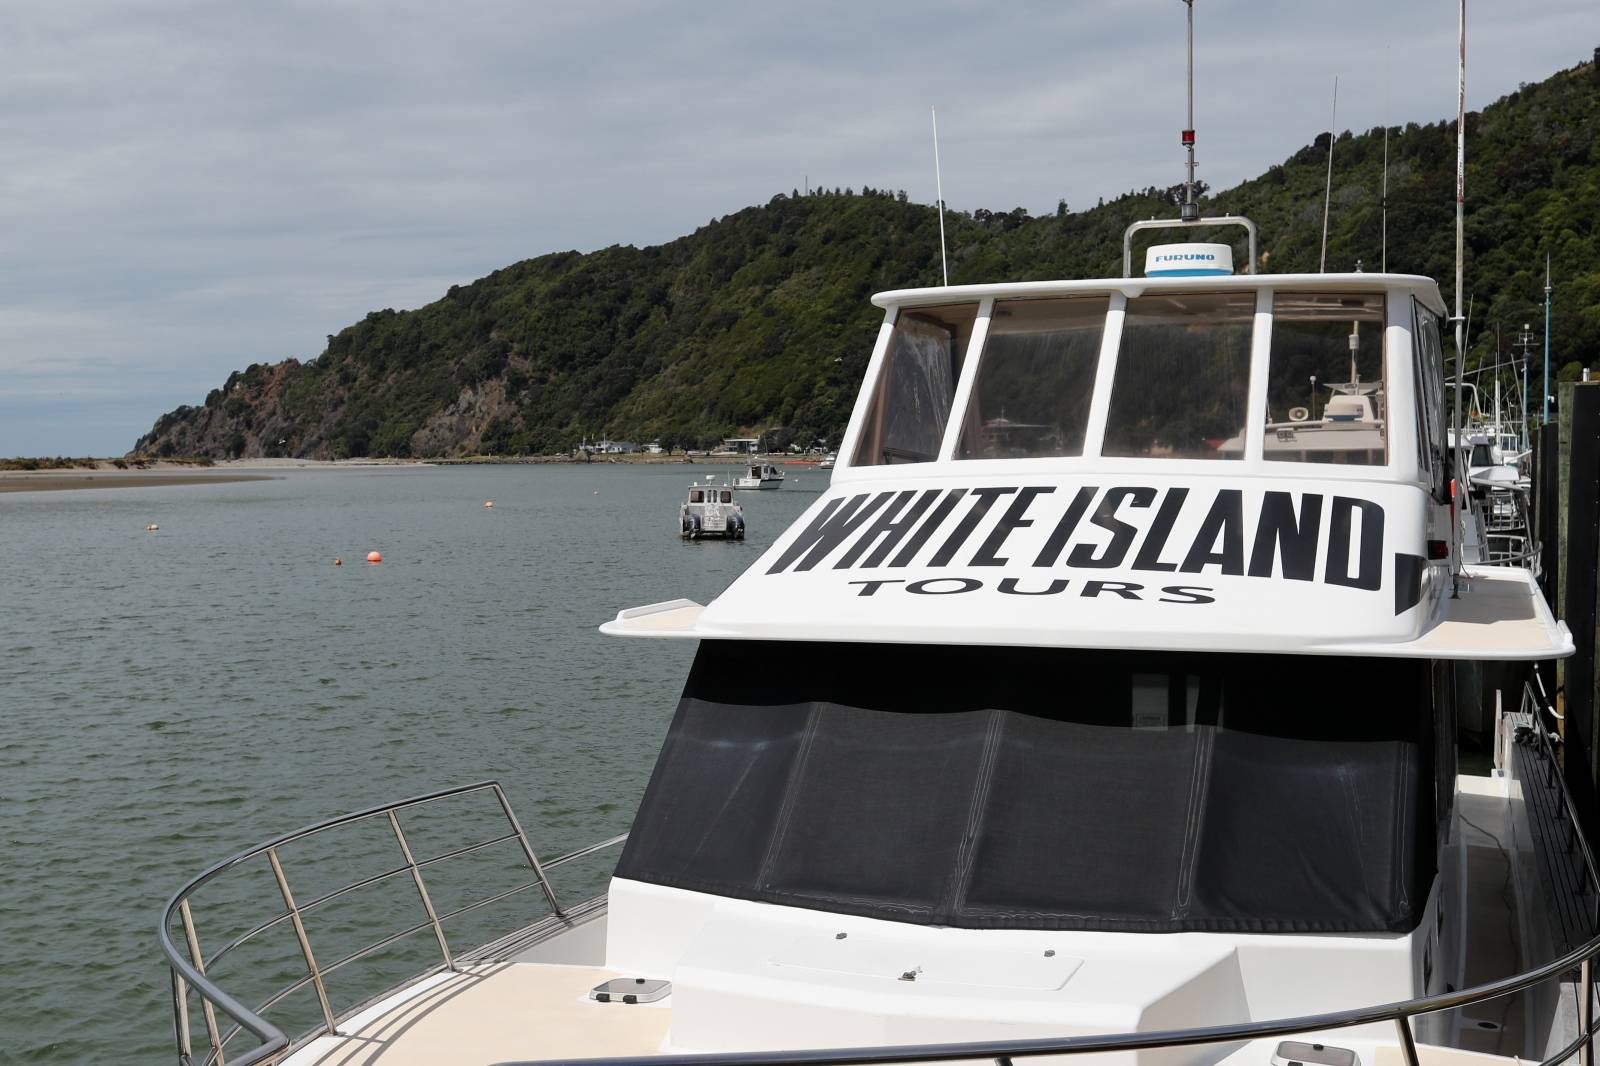 A tour operator's boat to White Island is seen at the harbour in Whakatane